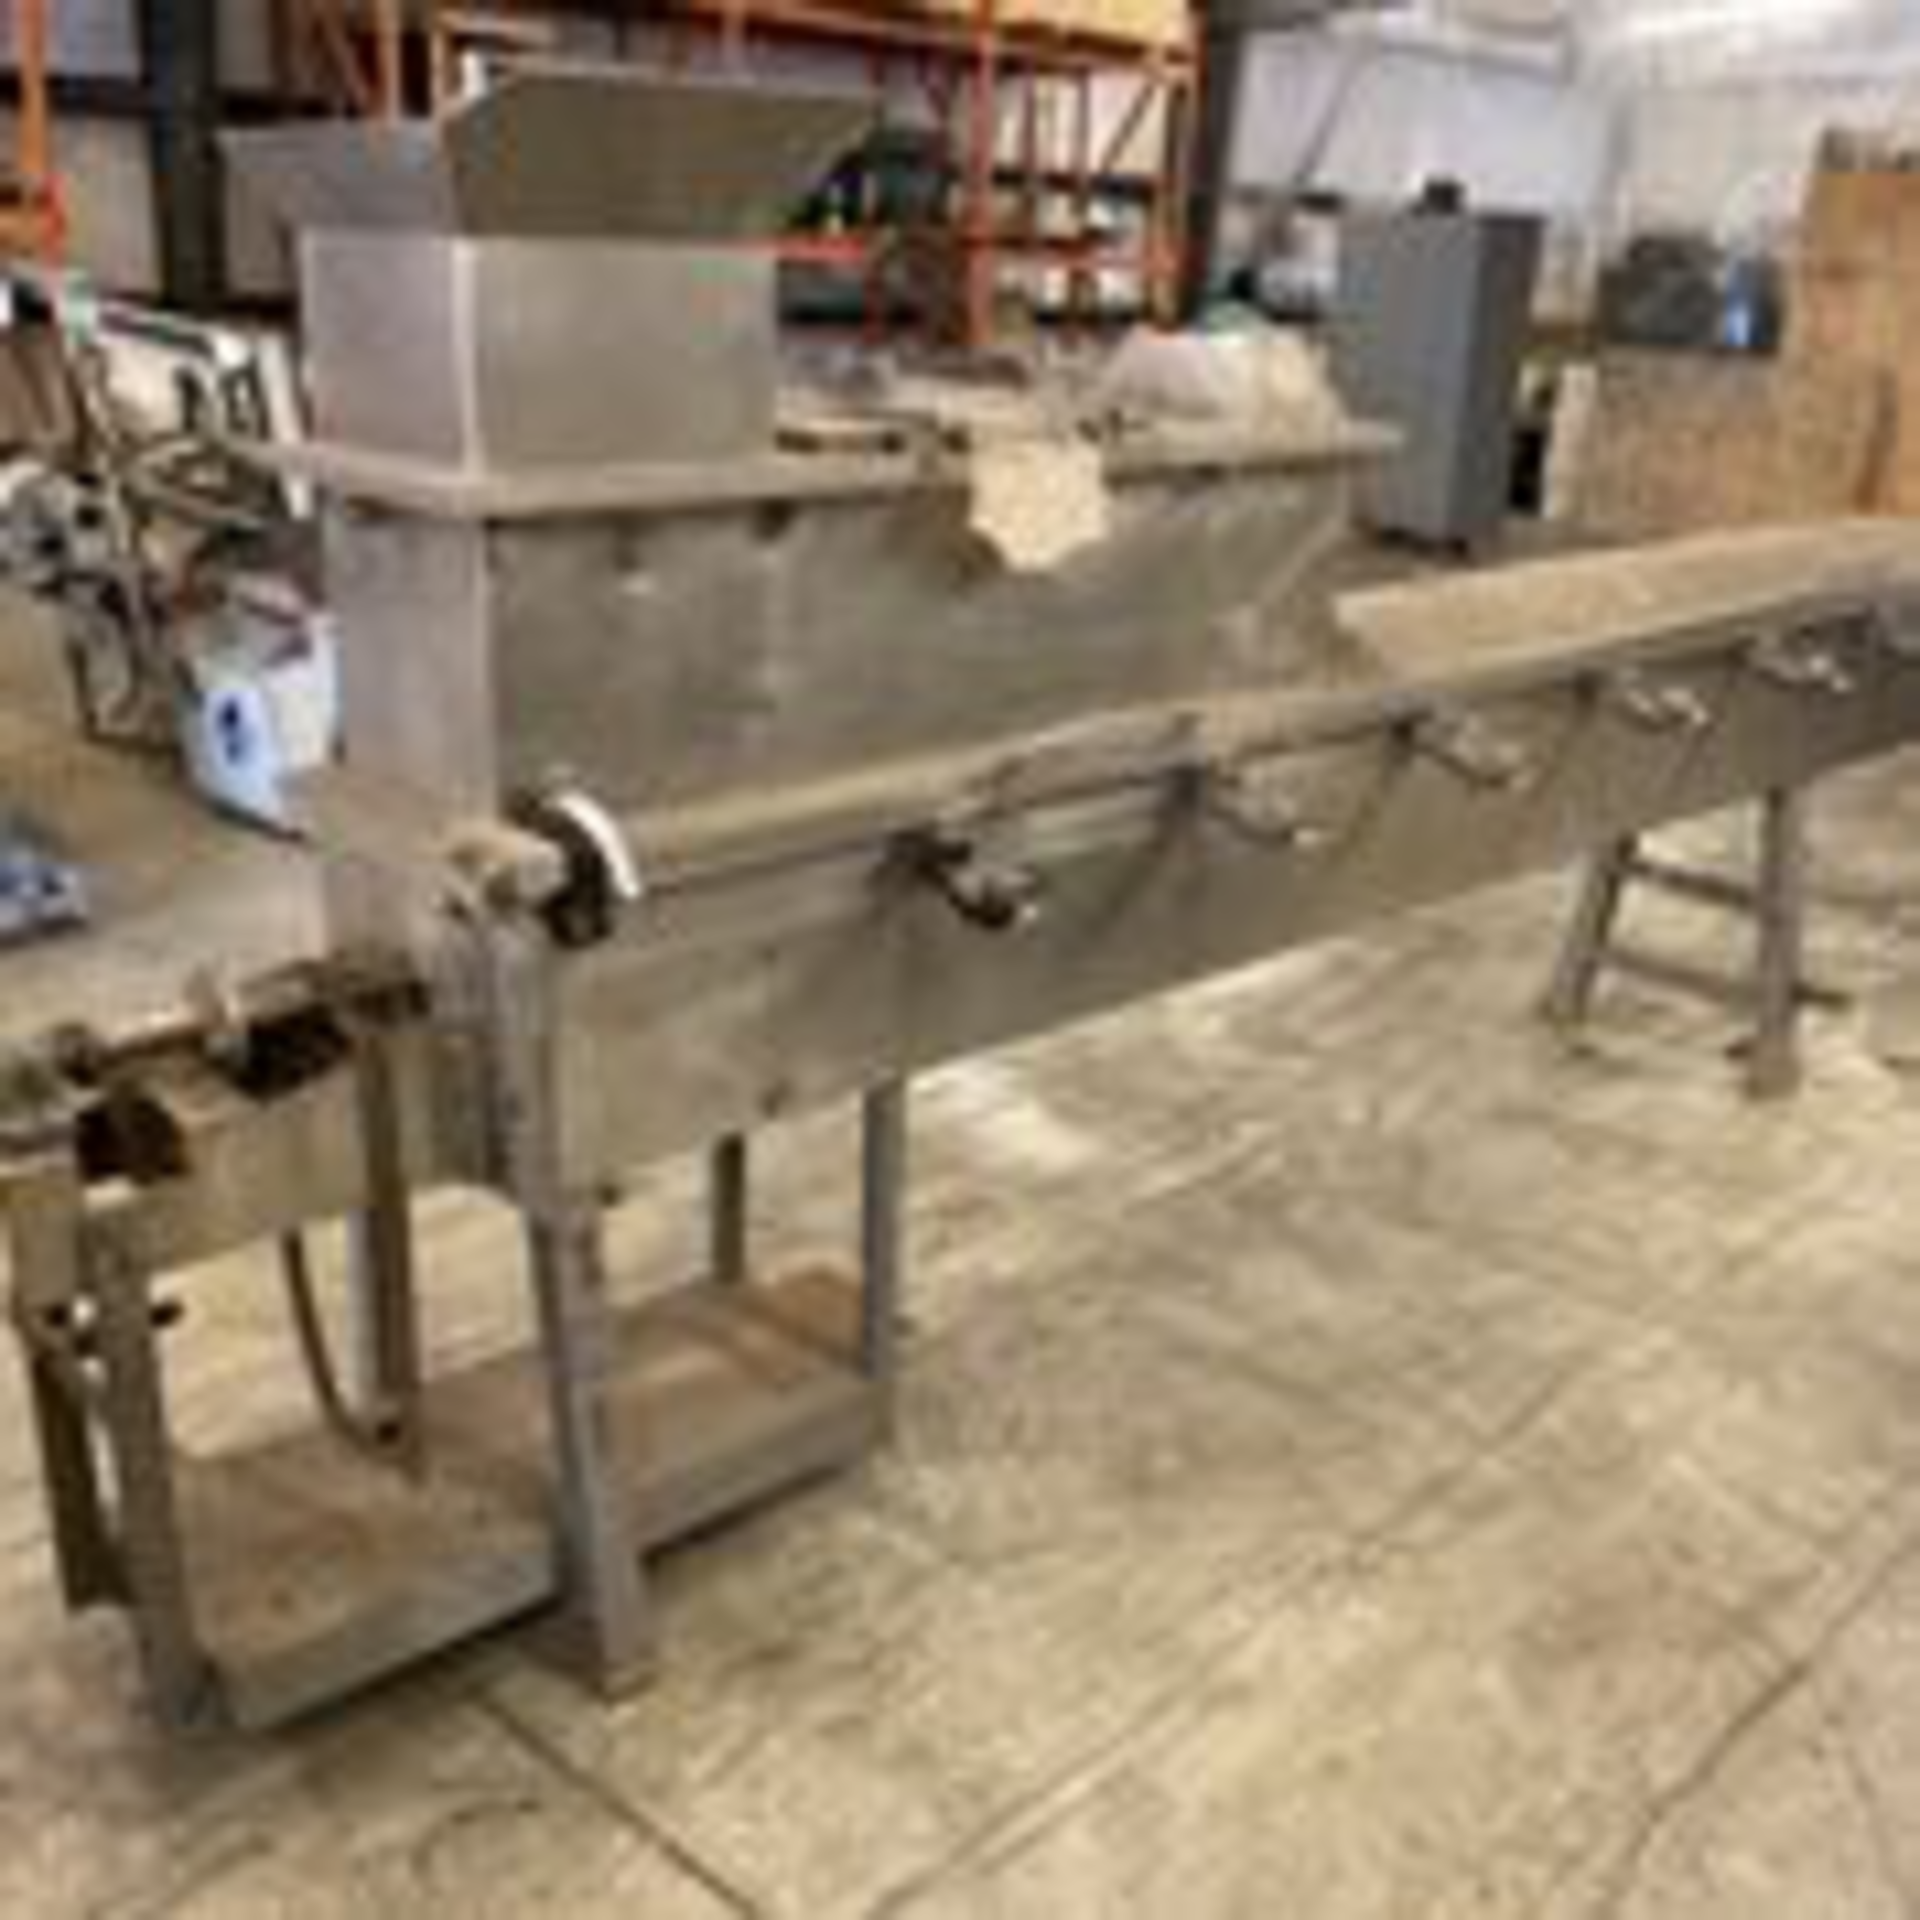 Auger Mixer/Cooker. LOADING FEE $100